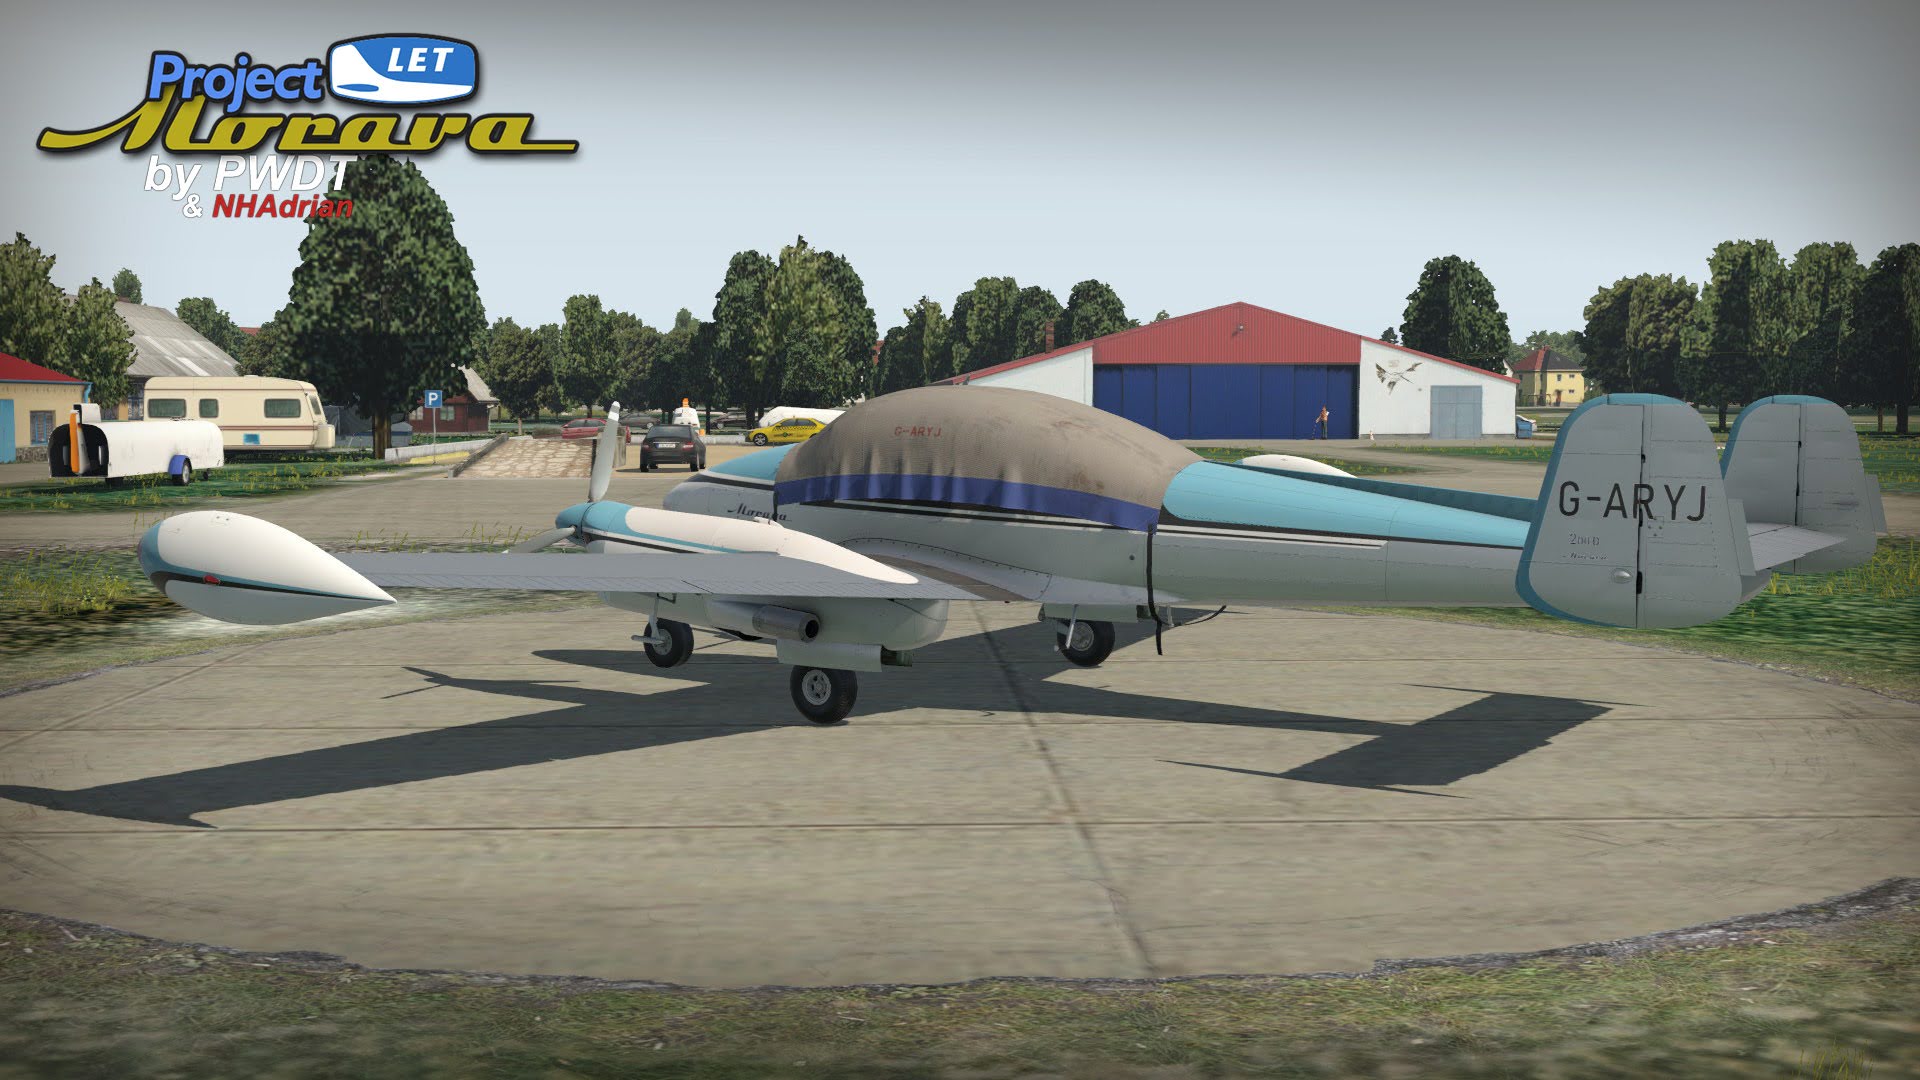 News! by developments NEWS! L-200D X-Plane The - Release : Pannon Aircraft - Morava in and Reviews Let NH X-Plane Adrian Design - Wings (PWDT) Team latest